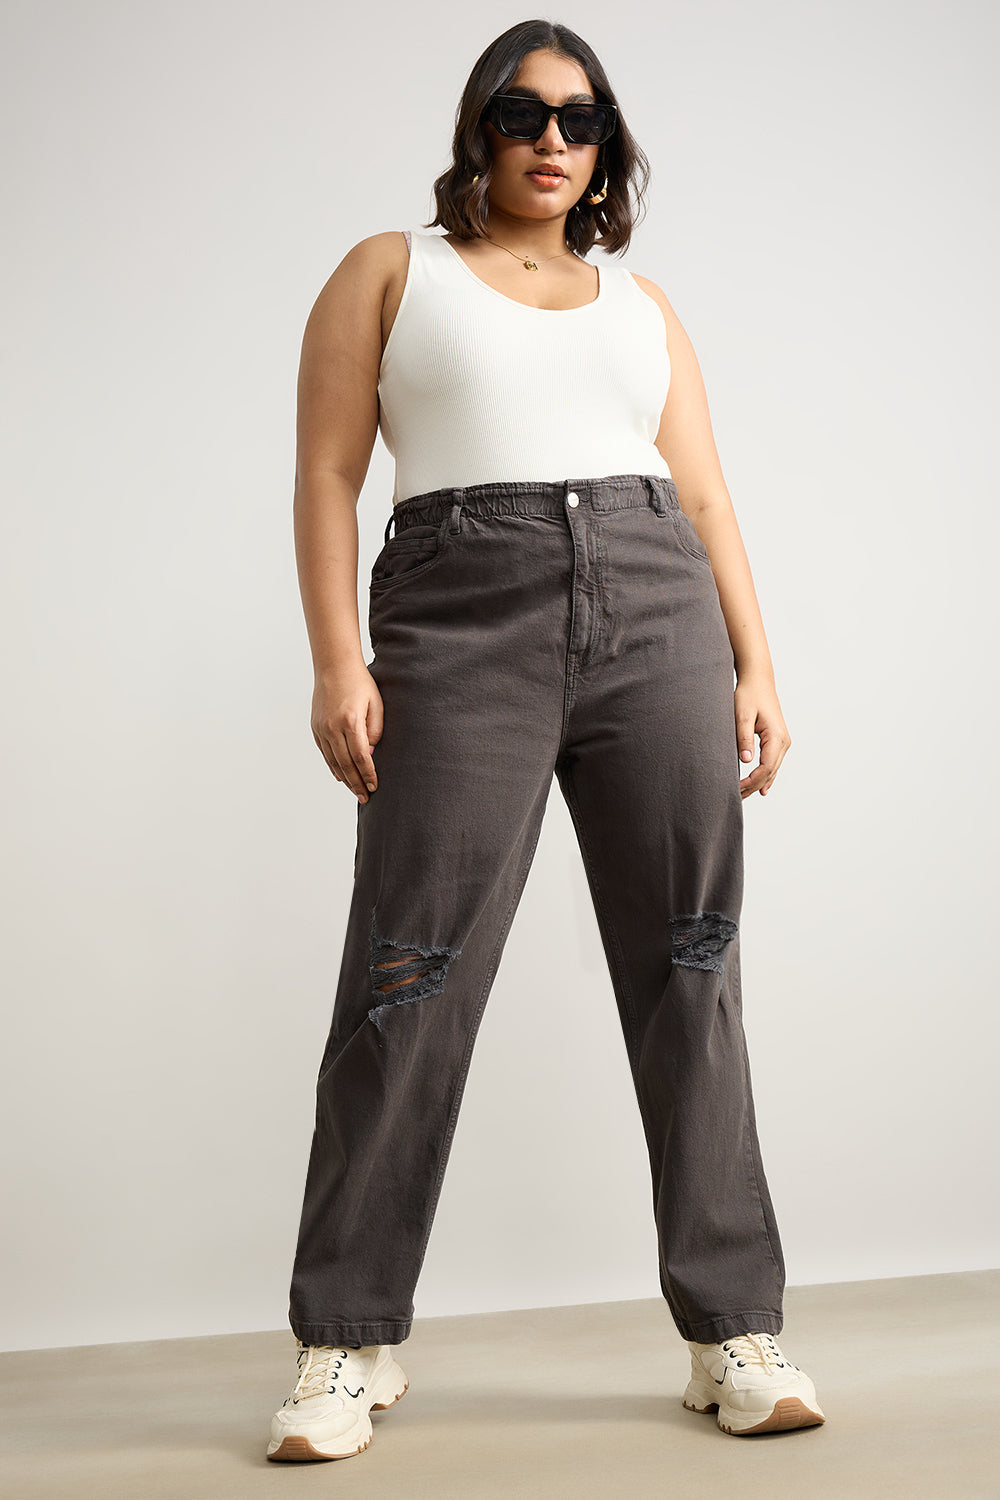 OLIVE GREEN DISTRESS MOM JEANS